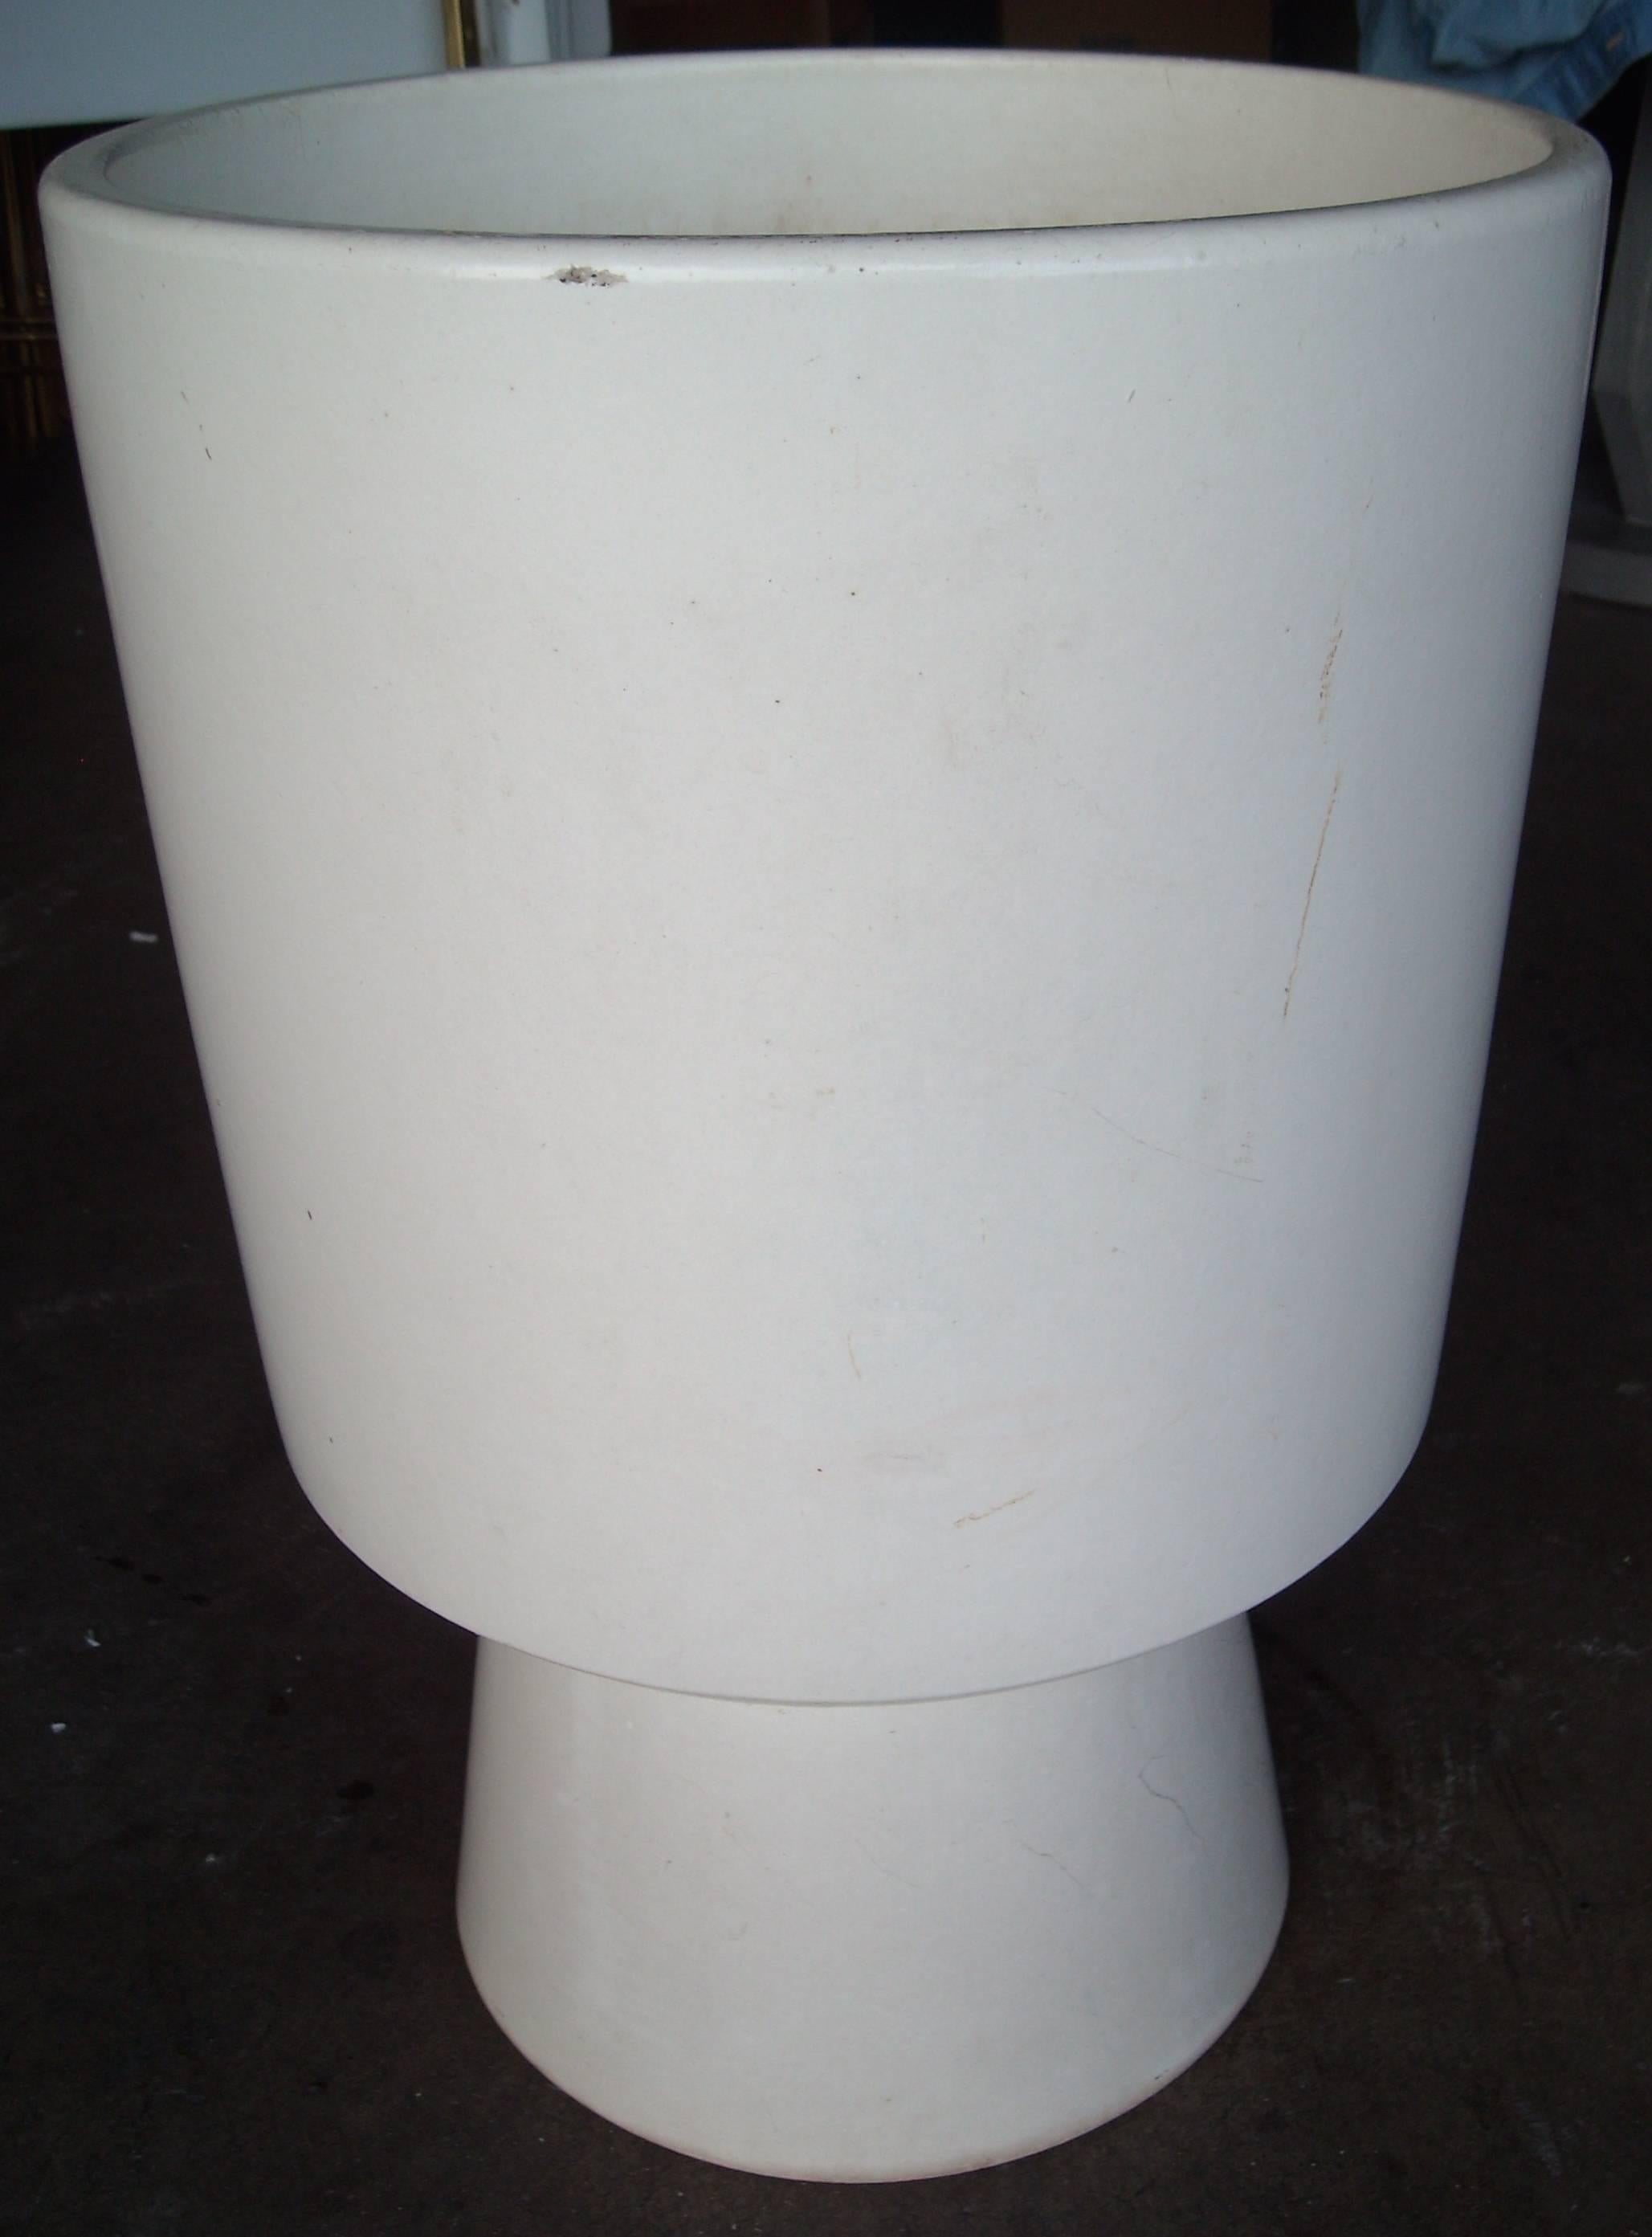 Nice tall, planter in matte white glaze. Good condition, small rough are at rim. As shown.